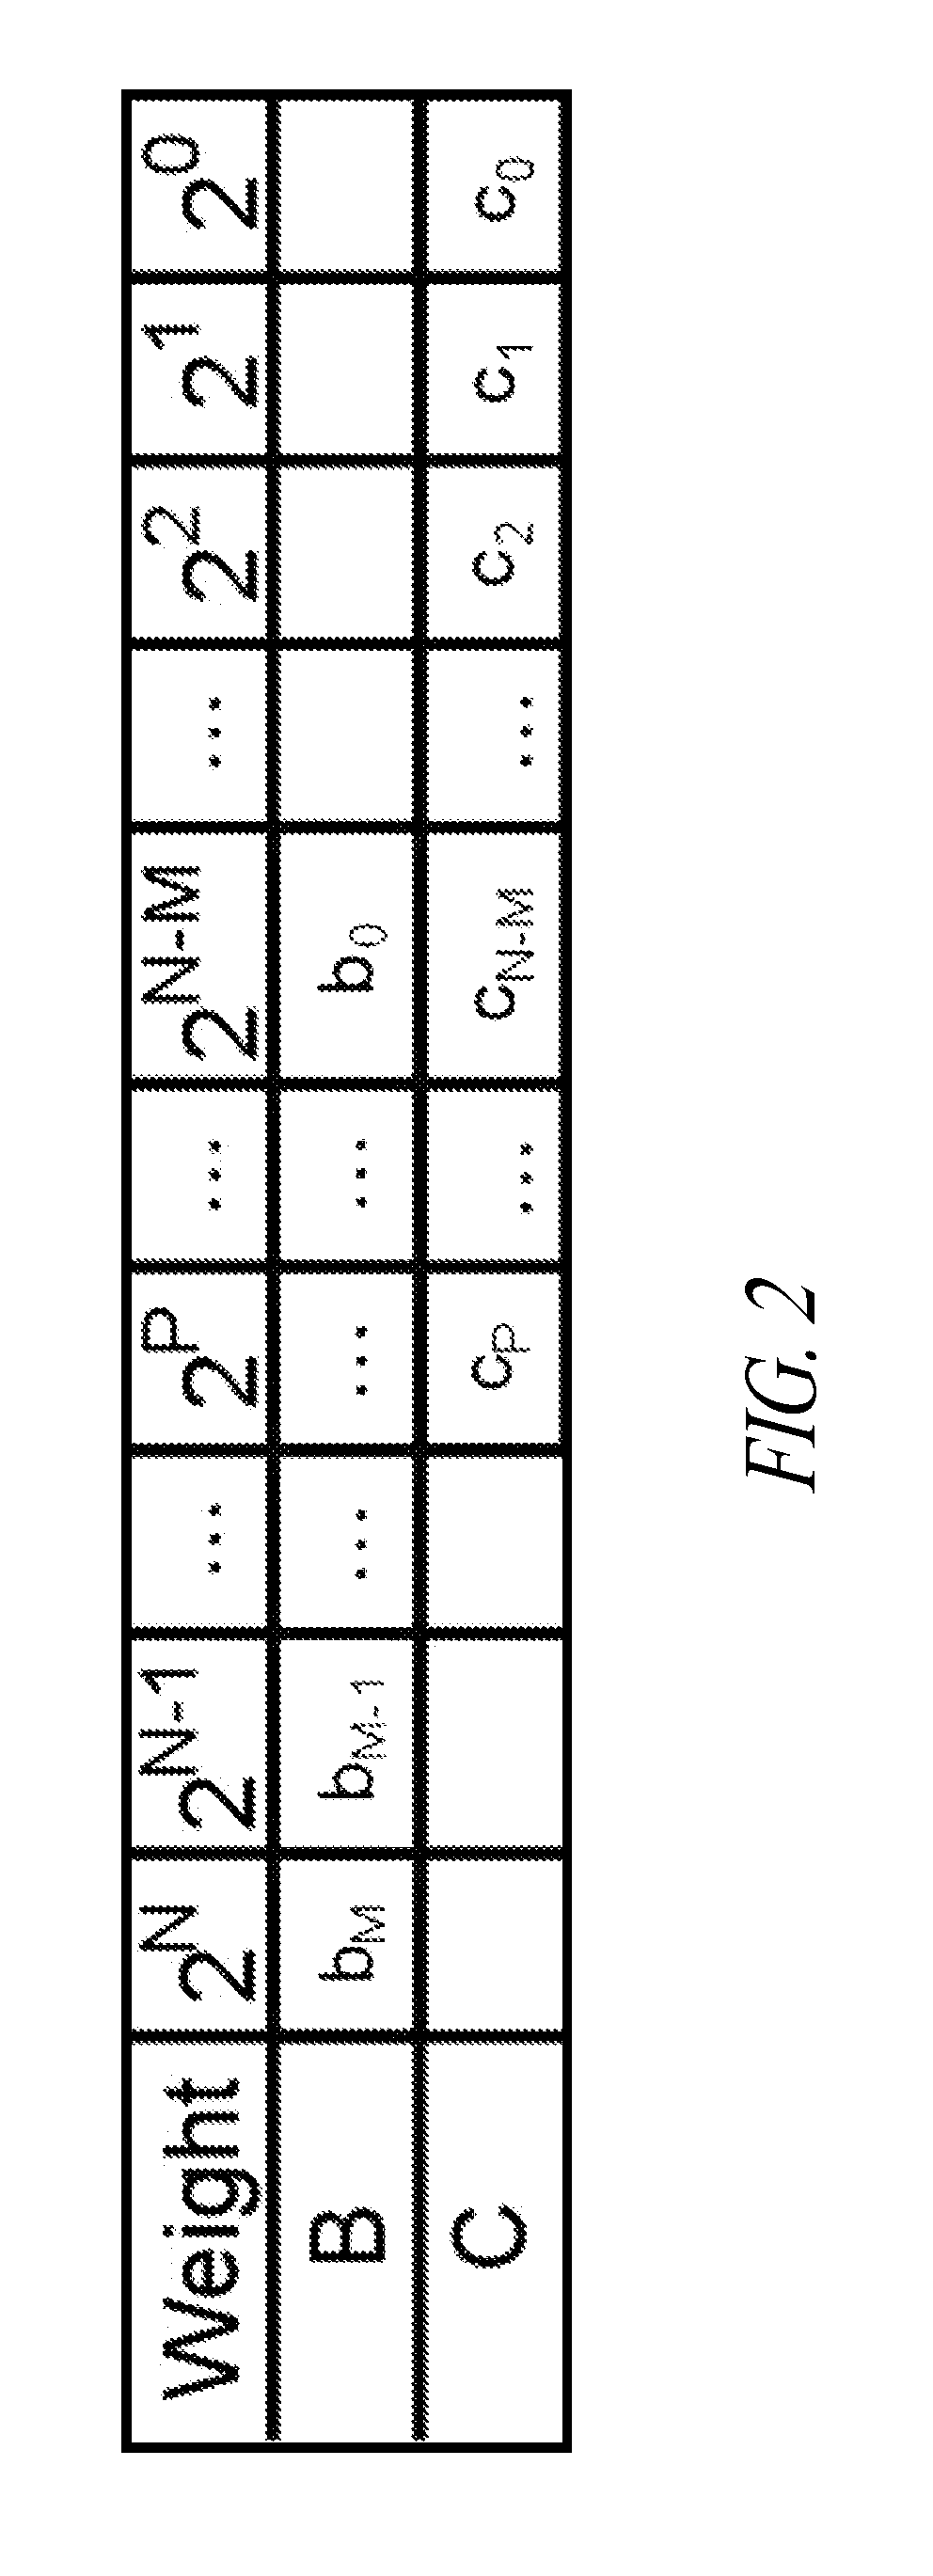 Method for digital error correction for binary successive approximation analog-to-digital converter (ADC)